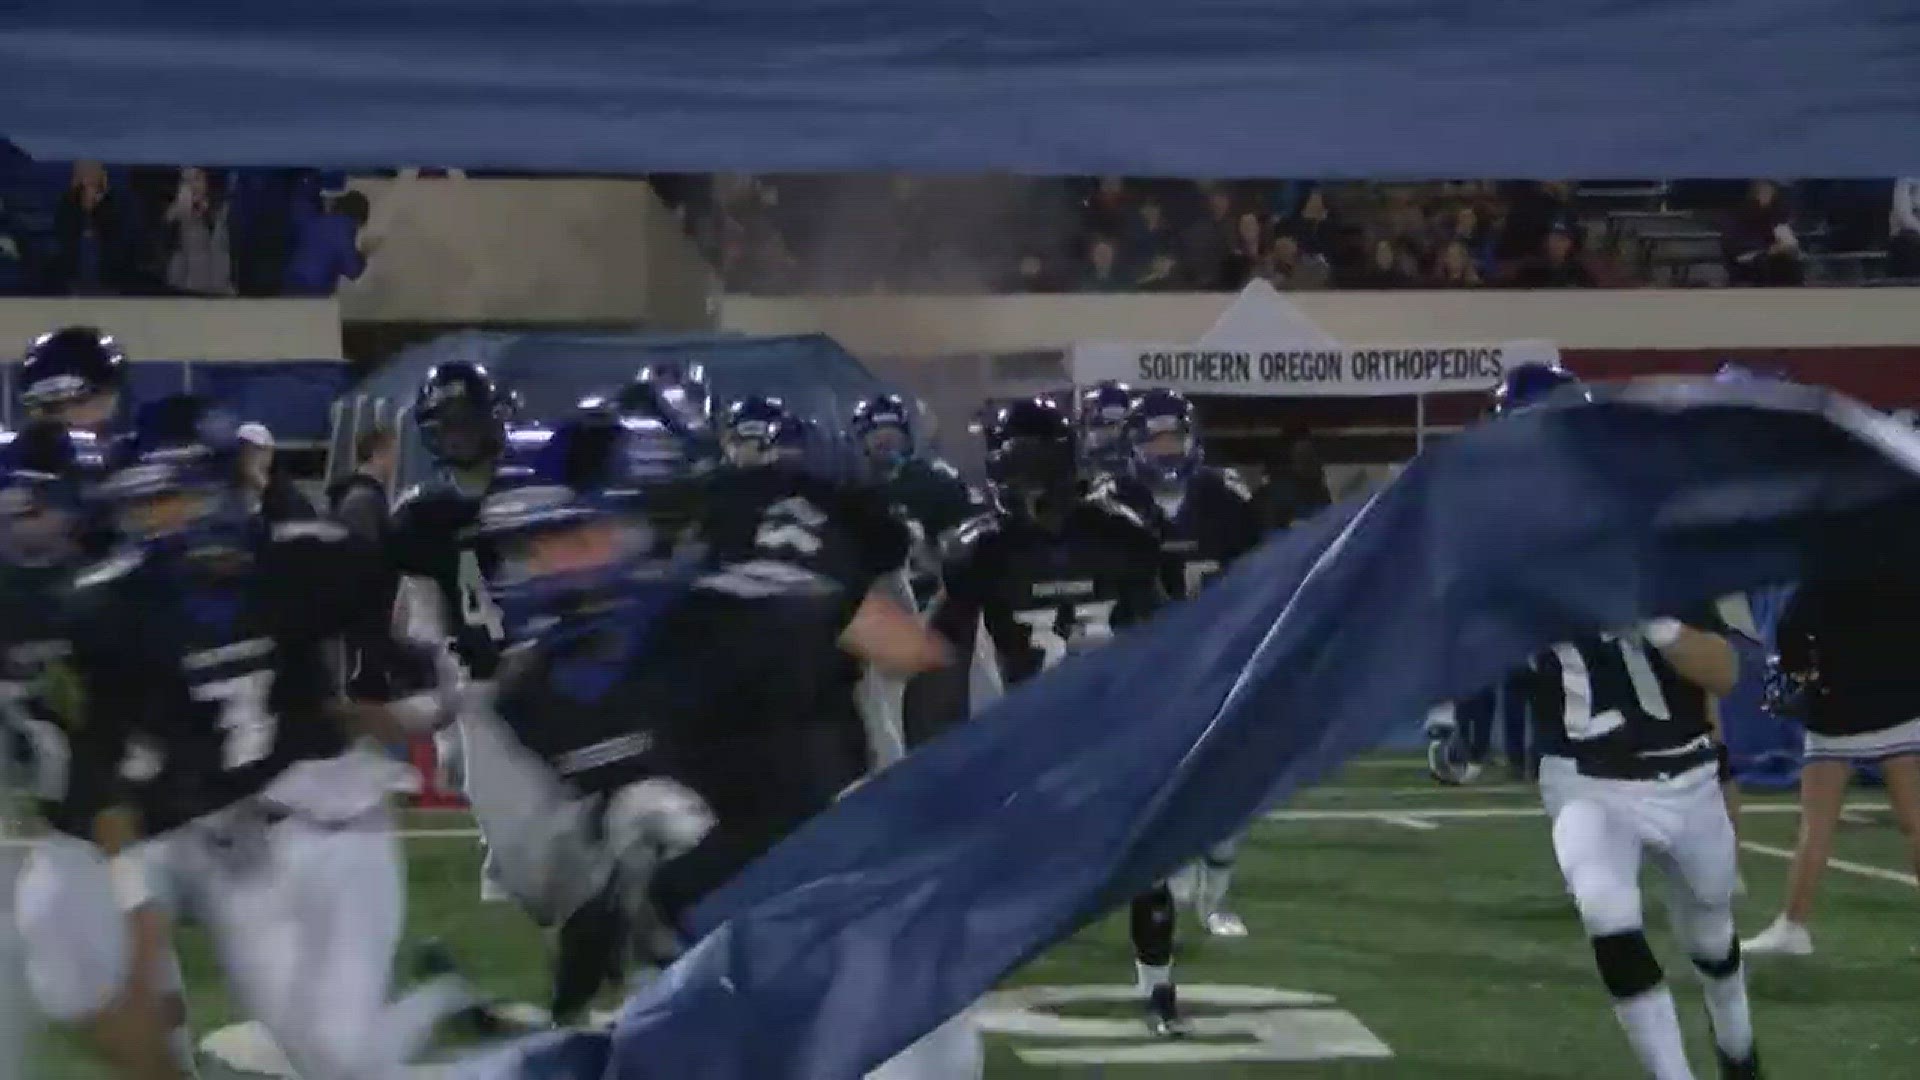 Highlights of No. 5 South Medford's 42-14 win over No. 12 Lincoln in the second round of the playoffs on Nov. 10, 2017. Highlights courtesy of KDRV.